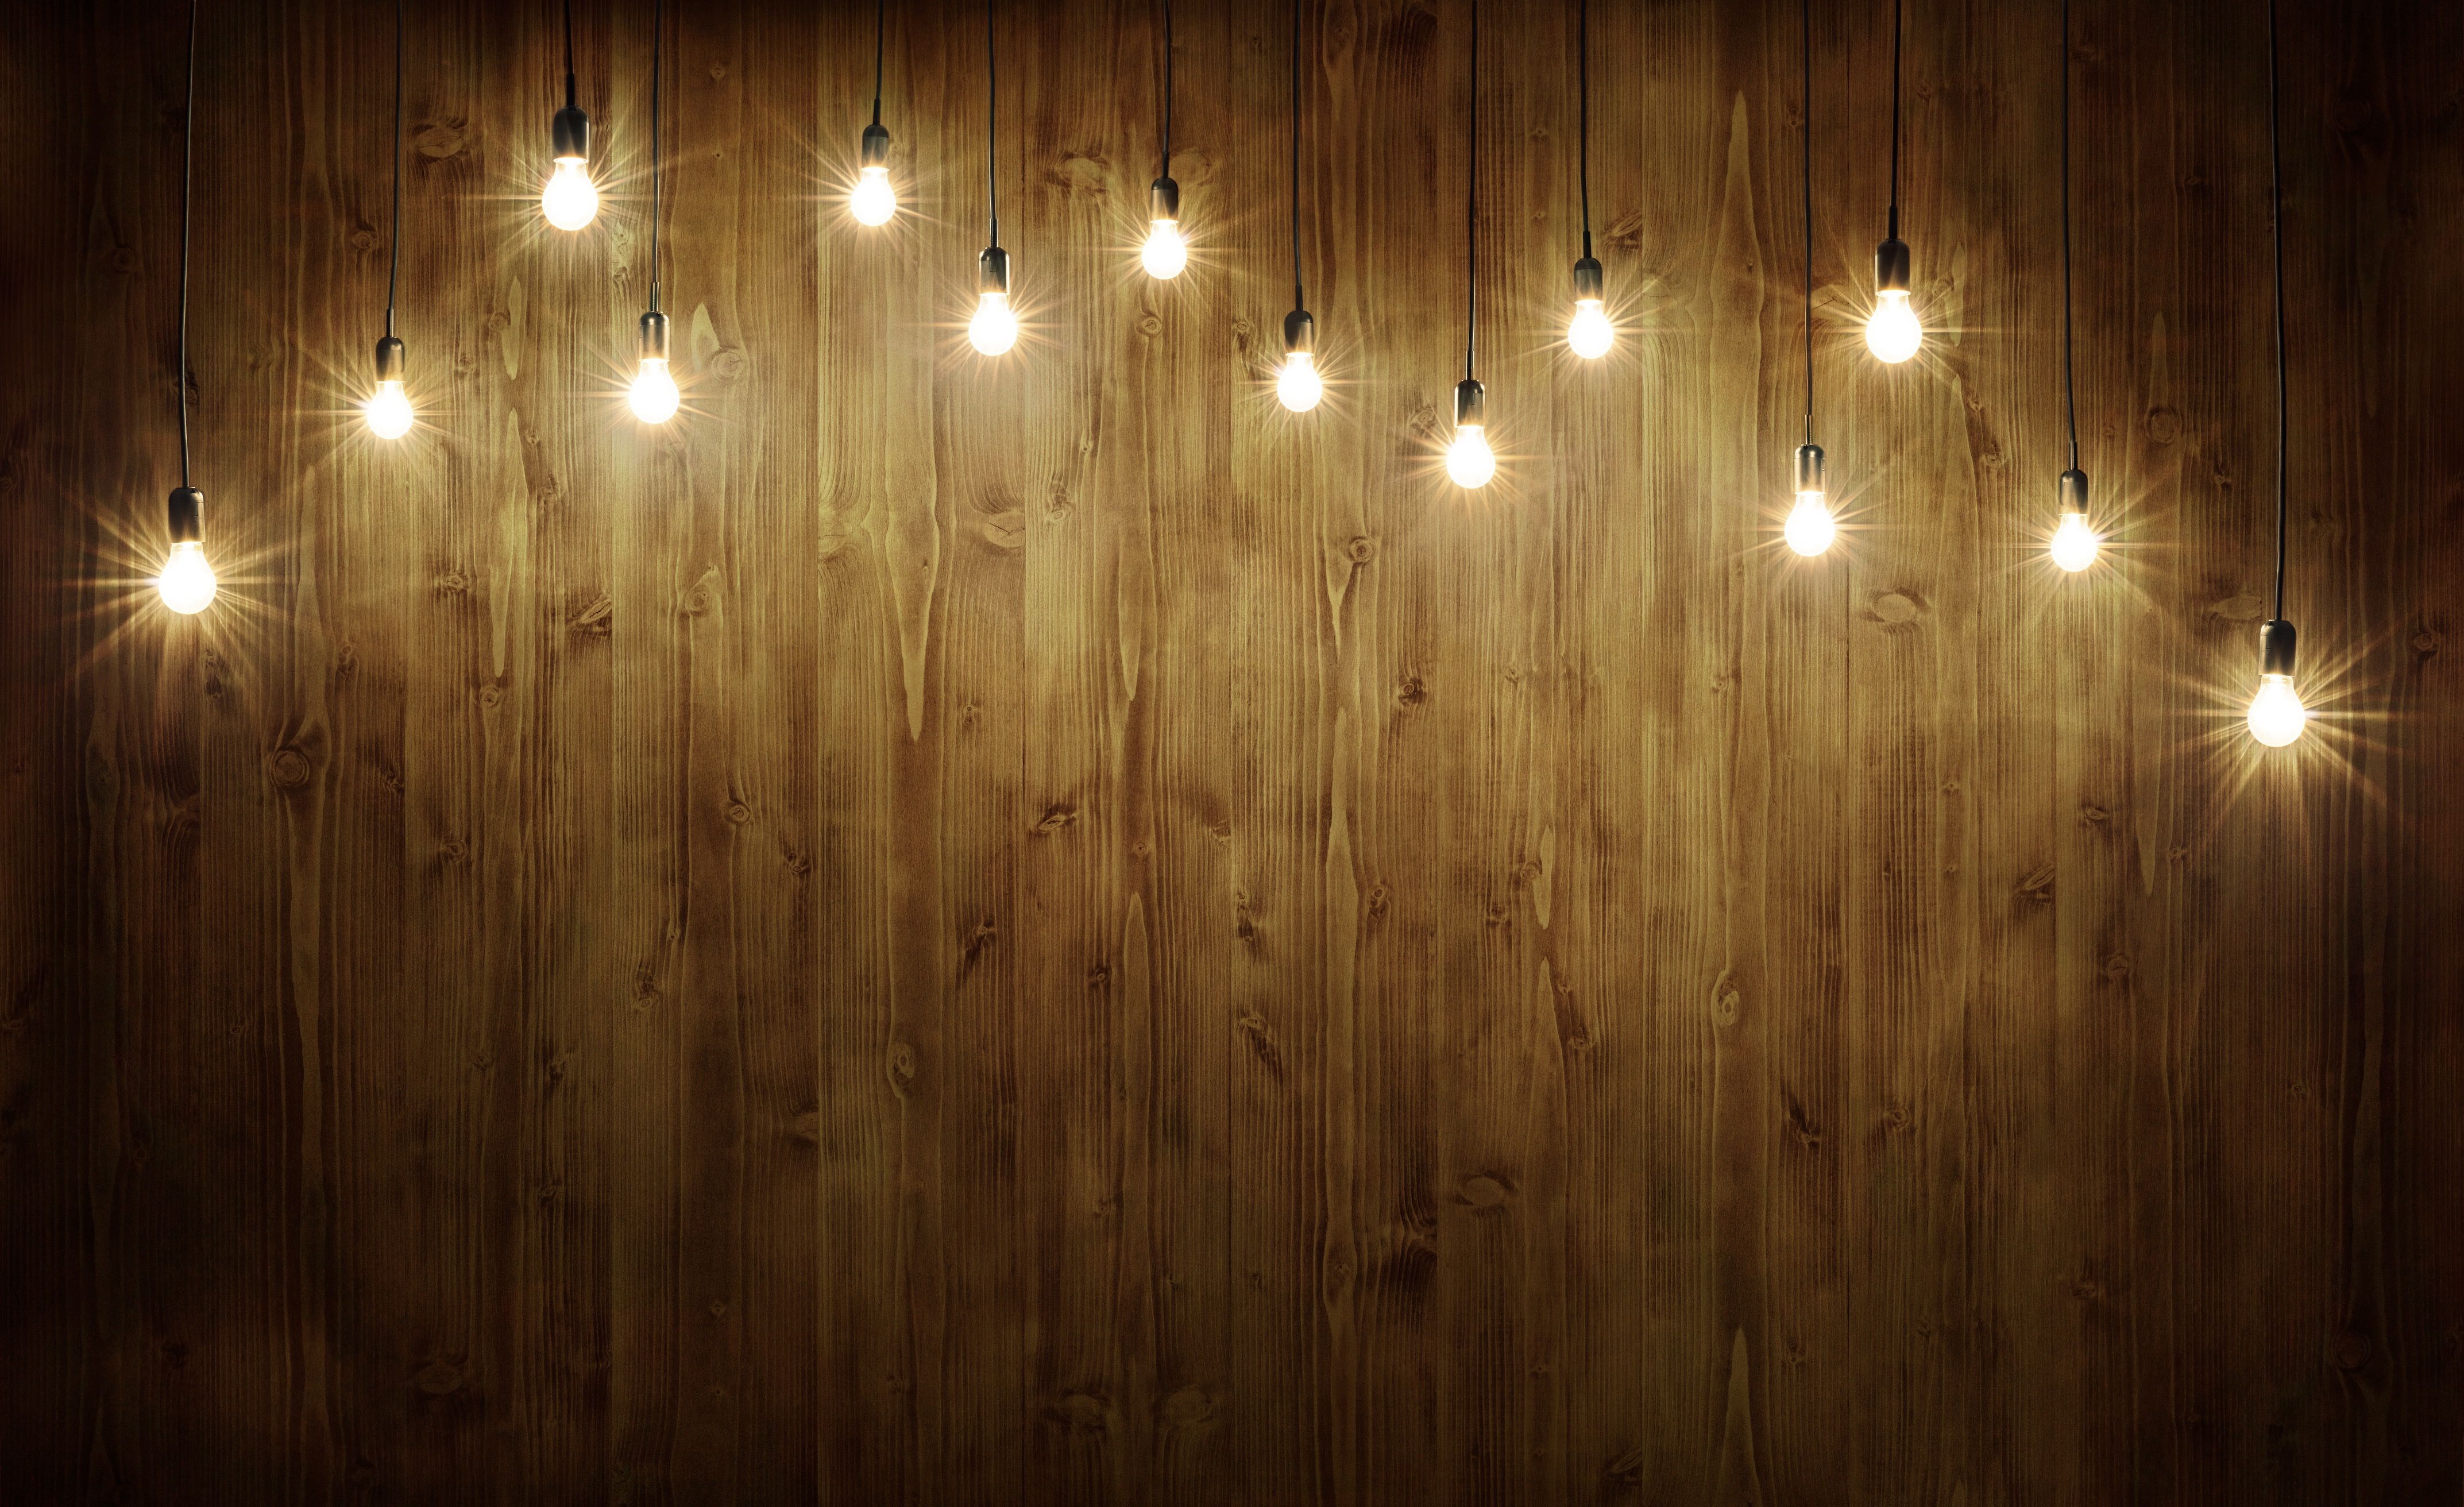 Free download 10x10 Wood Background with Lightbulbs Green screen background [4290x2624] for your Desktop, Mobile & Tablet. Explore Lights Background. Lights Wallpaper, Christmas Lights Background, Northern Lights Wallpaper